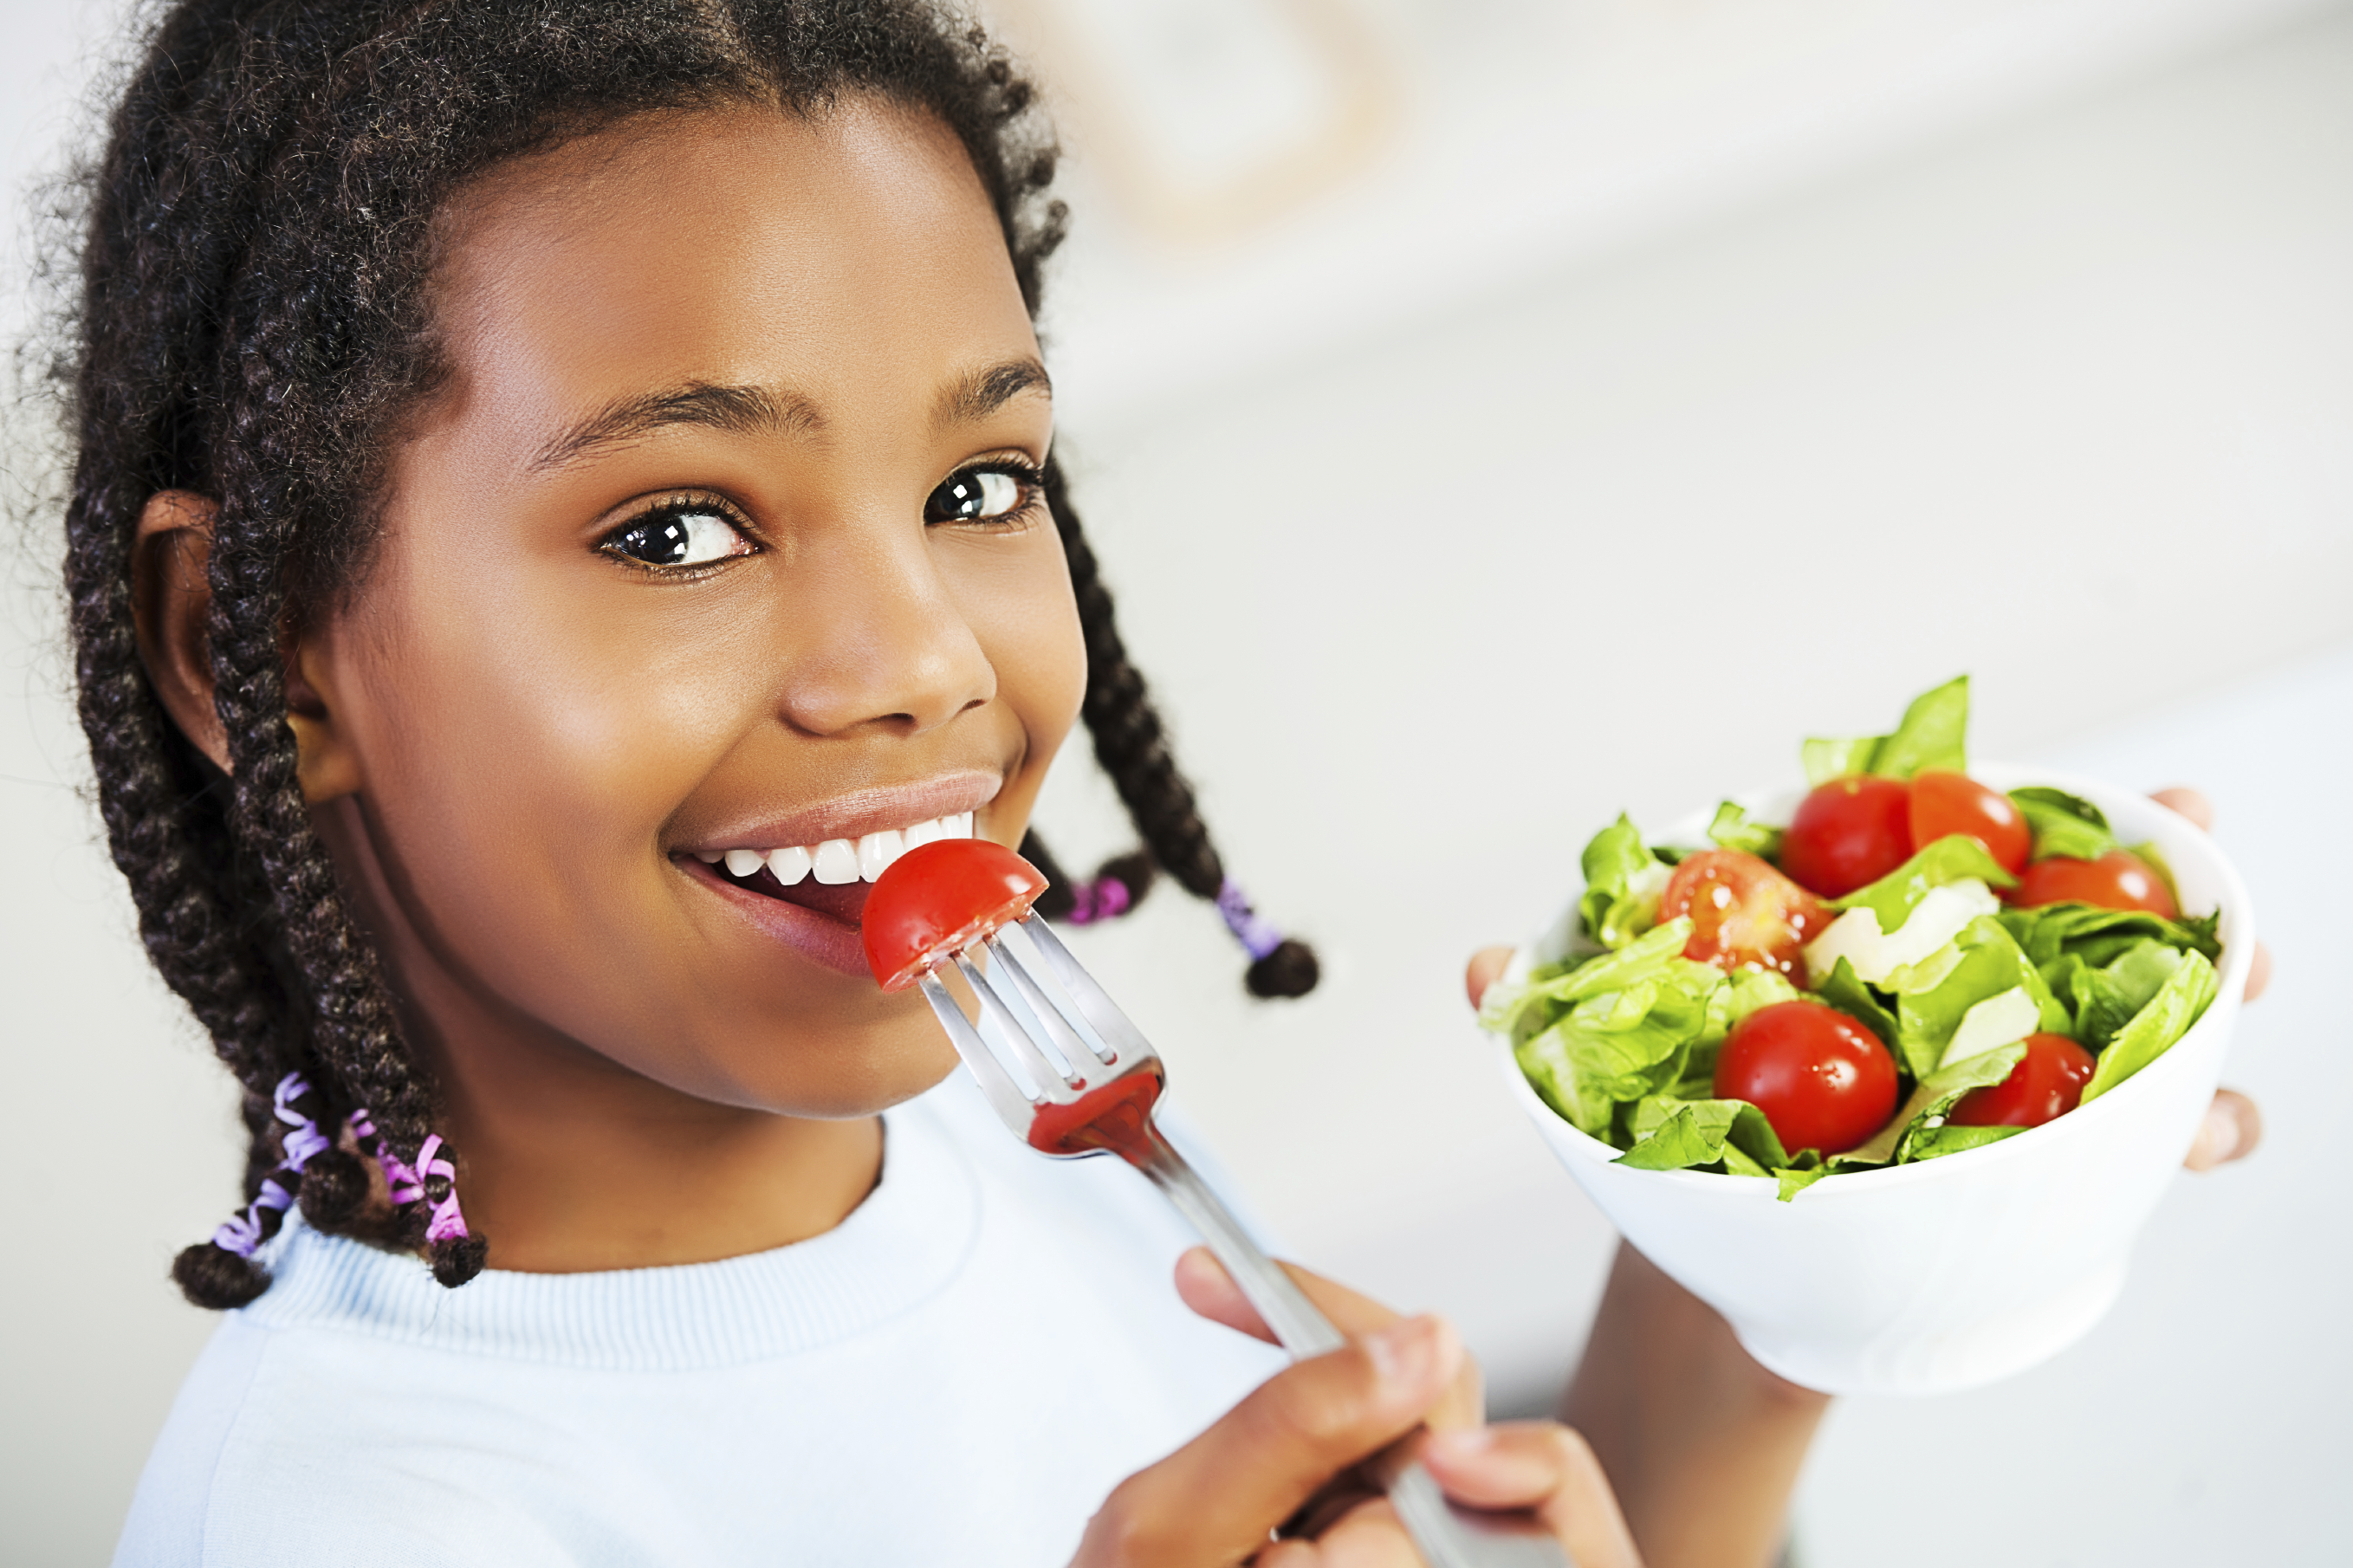 Little girl with healthy food. Eating salad and looking at camera.  [url=http://www.istockphoto.com/search/lightbox/9786682][img]http://dl.dropbox.com/u/40117171/children5.jpg[/img][/url]